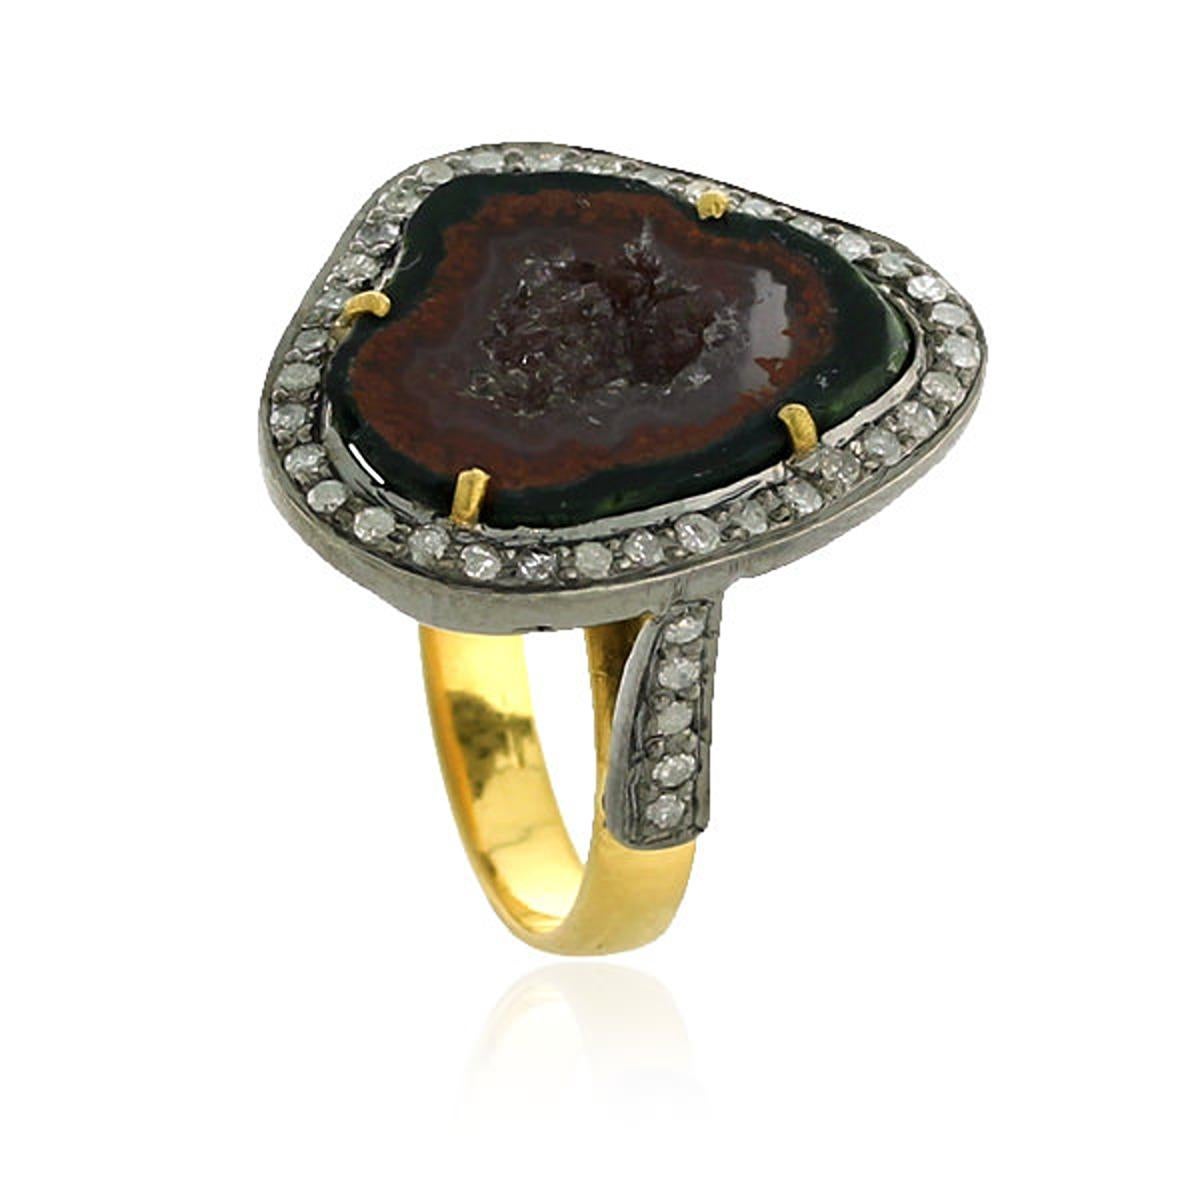 11 ct Sliced Geode Cocktail Ring With Pave Diamonds In 18k Yellow Gold & Silver In New Condition For Sale In New York, NY